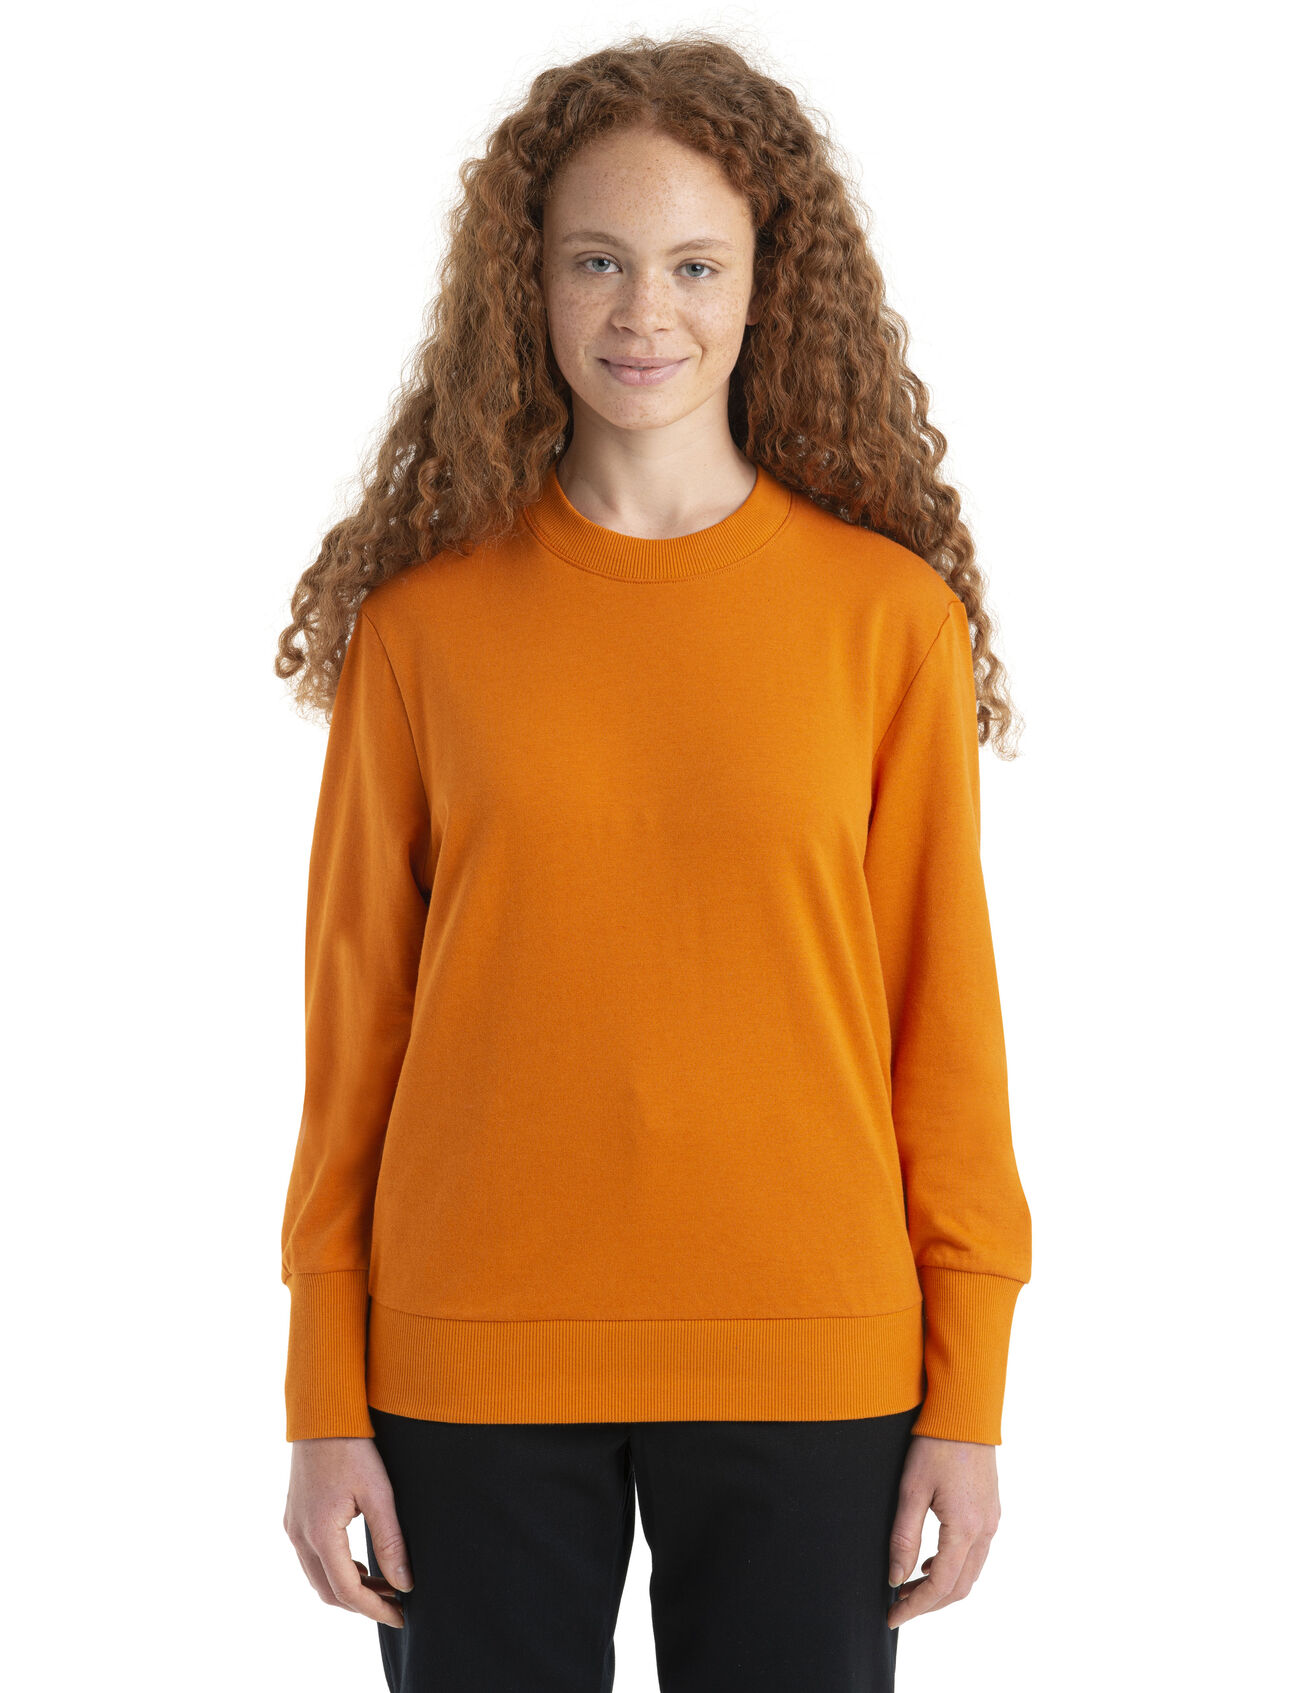 Womens Merino Cotton Central II Long Sleeve Sweatshirt A versatile, everyday pullover that goes anywhere in comfort, the Central II Long Sleeve Sweatshirt features a sustainable blend of natural merino wool and soft organically grown cotton. 